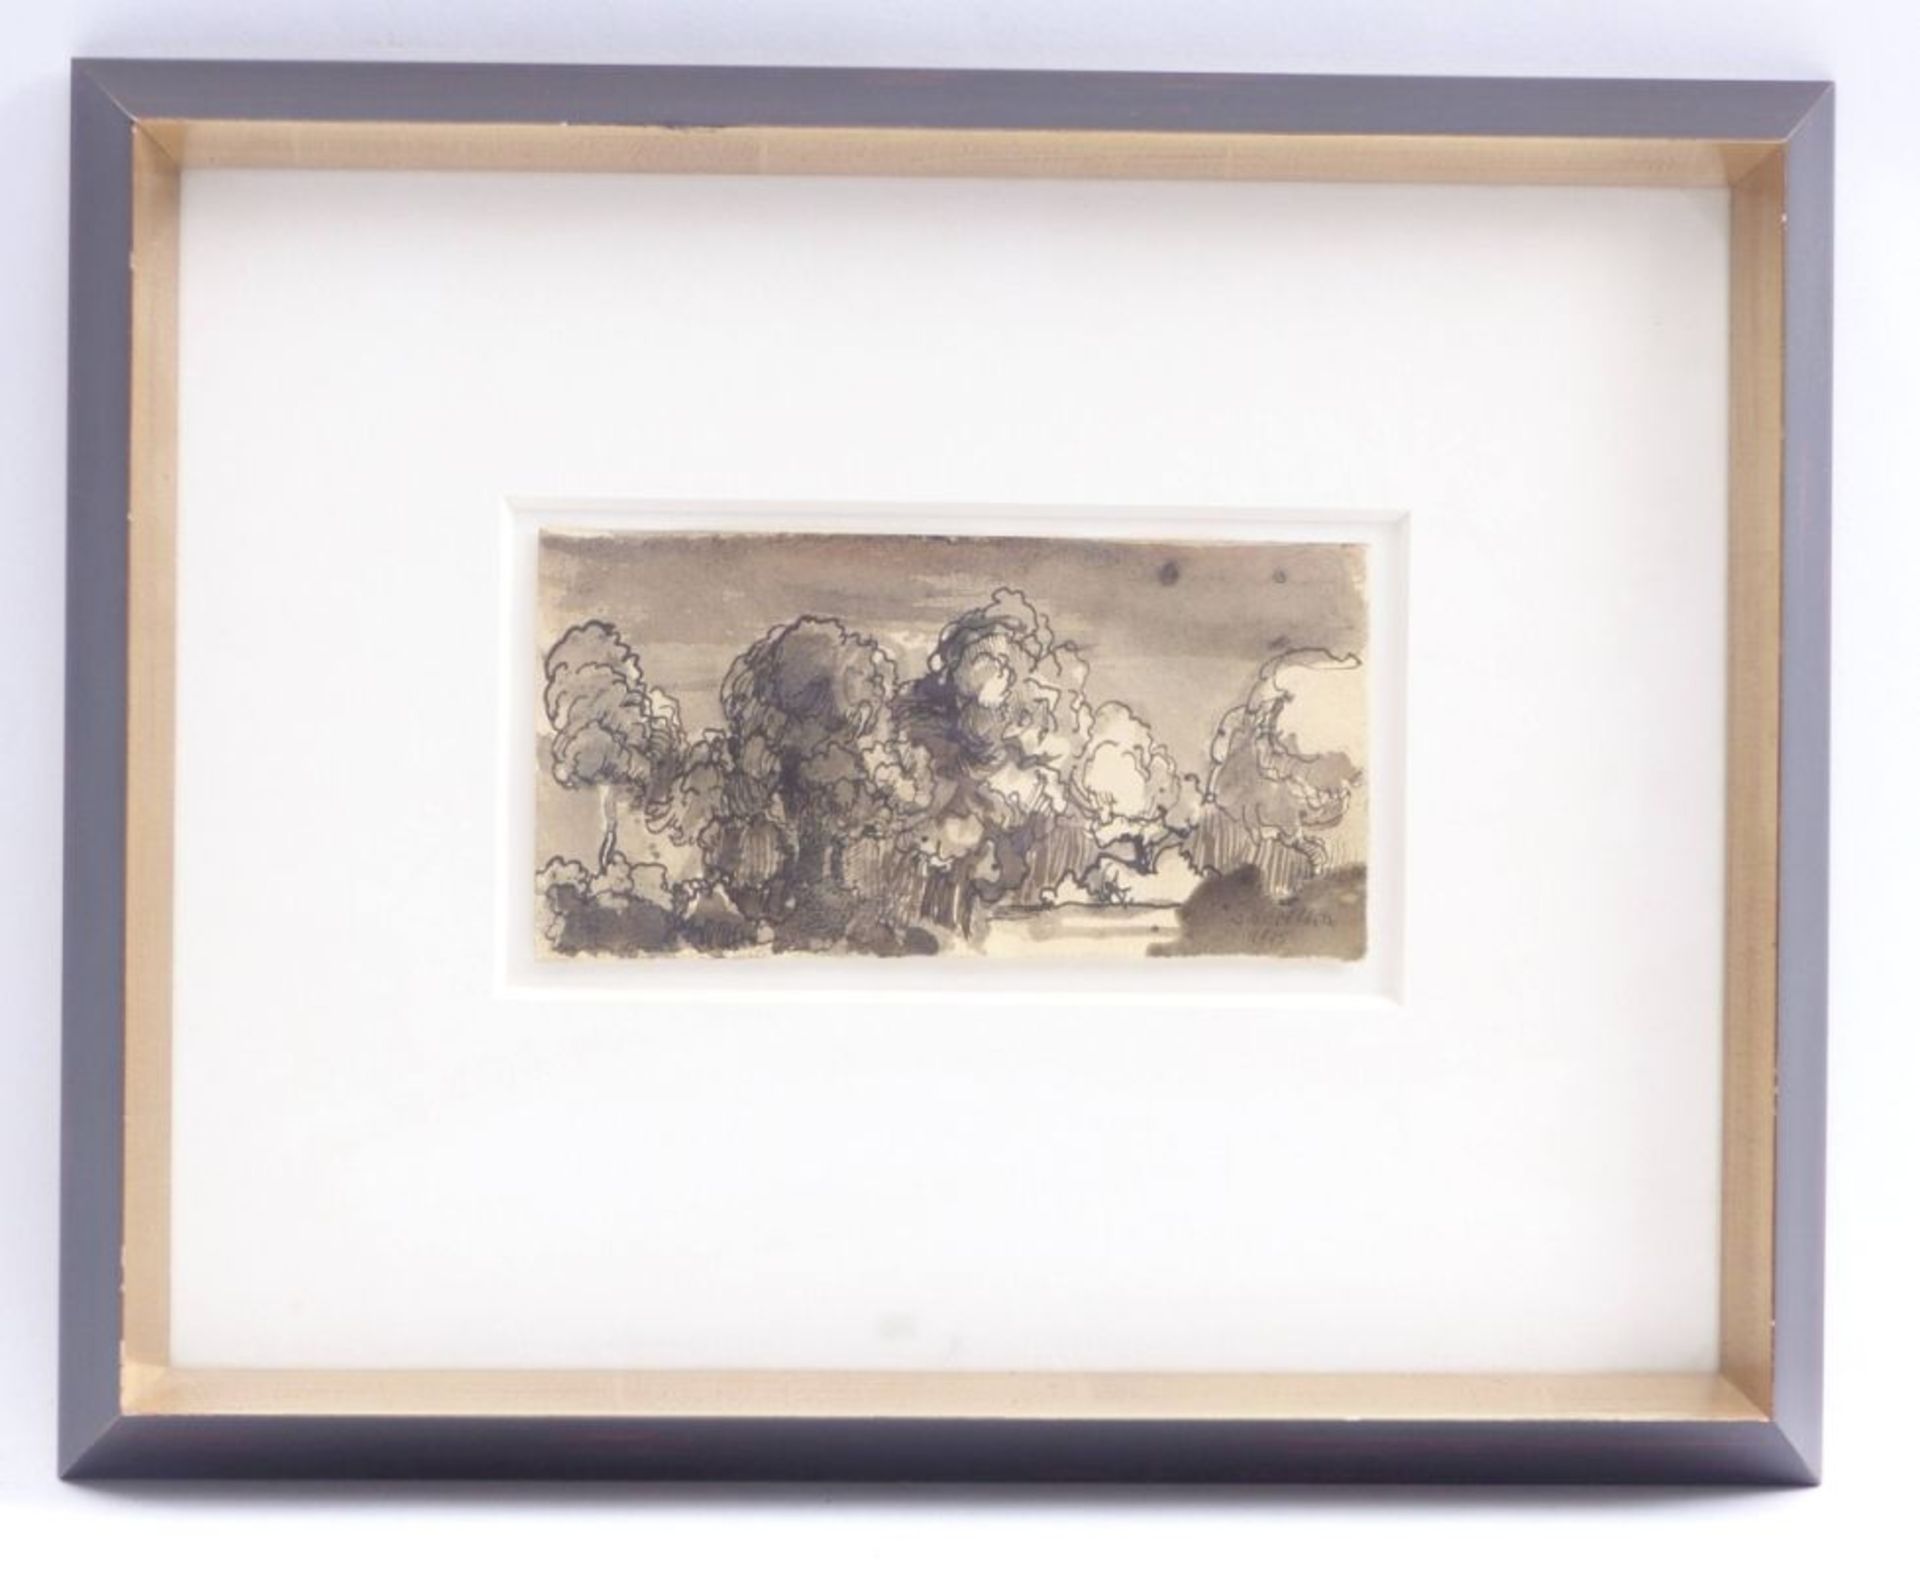 Pöhlitz, RainerLandscape with Deciduous Trees(Born 1952 in Pattenhofen) Ink drawing, washed, on - Image 2 of 2